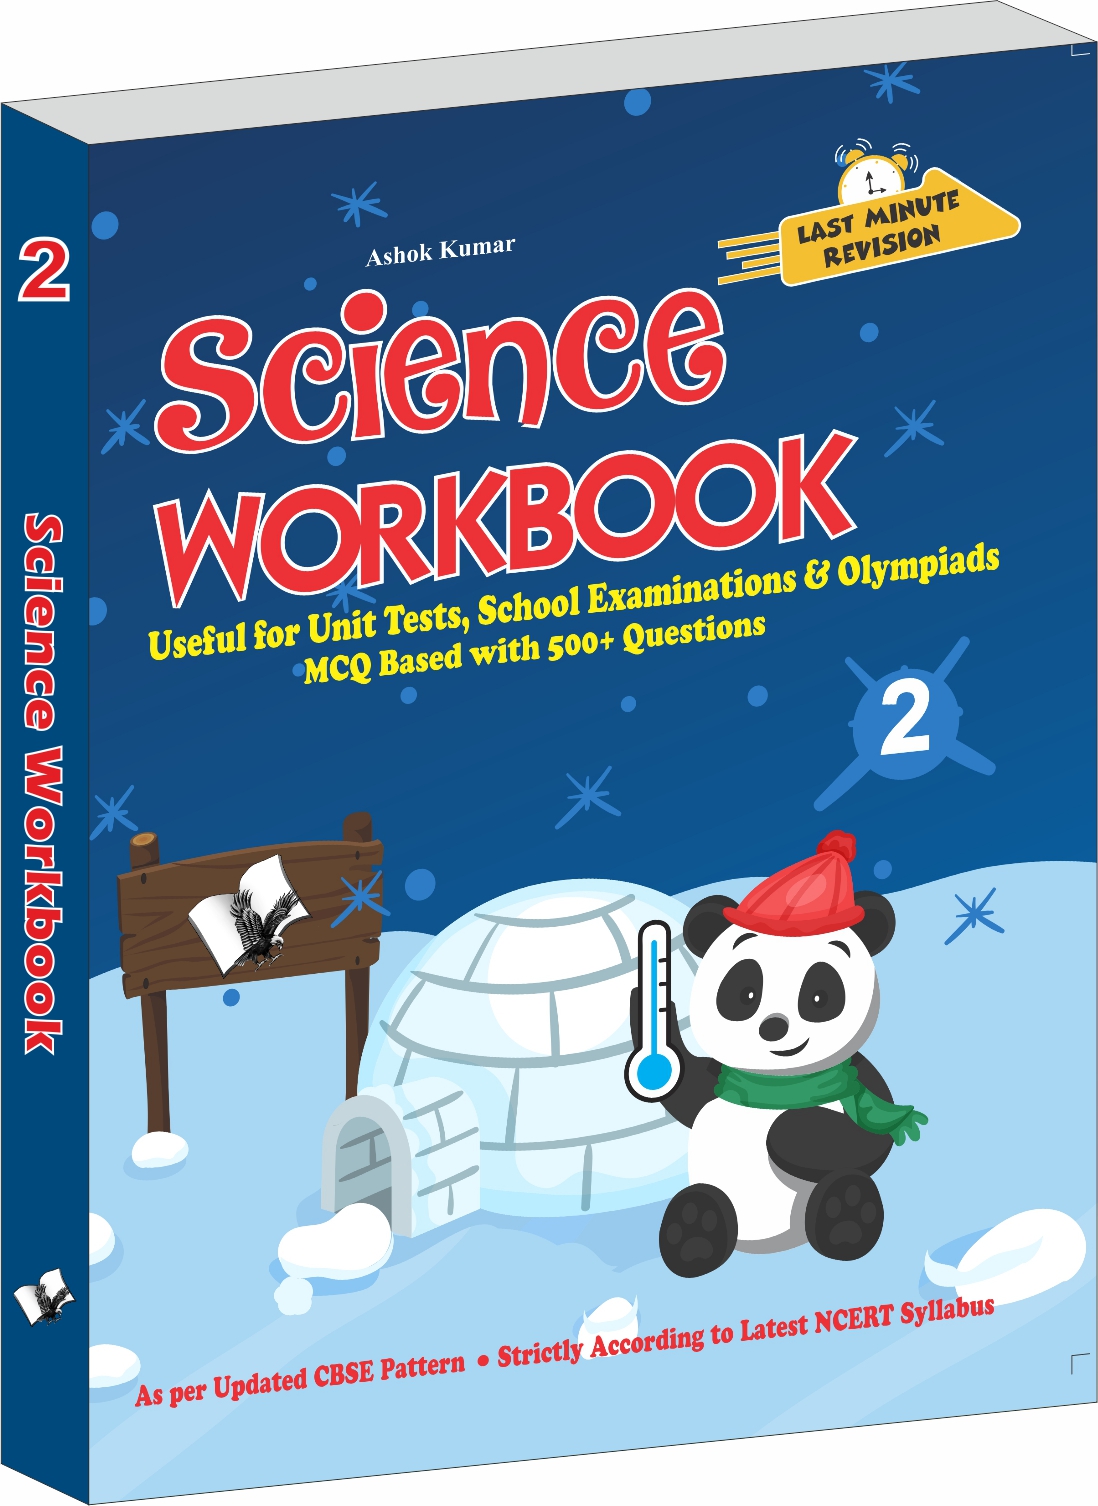 Science Workbook Class 2-Useful for Unit Tests, School Examinations & Olympiads